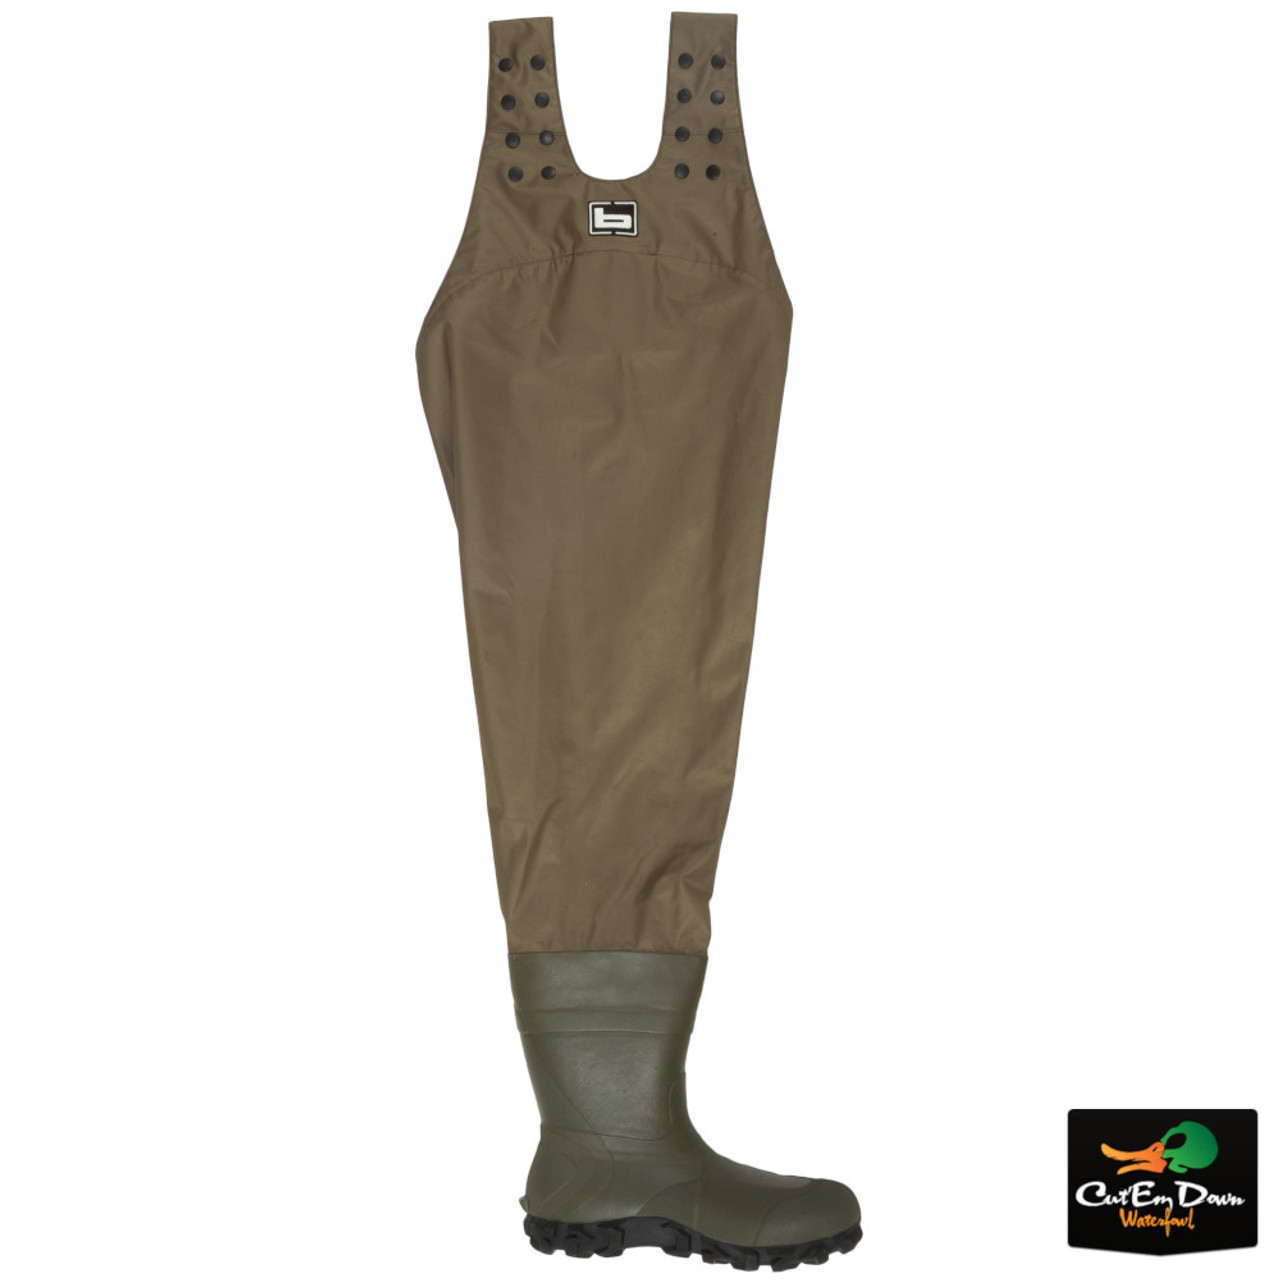 breathable hip waders